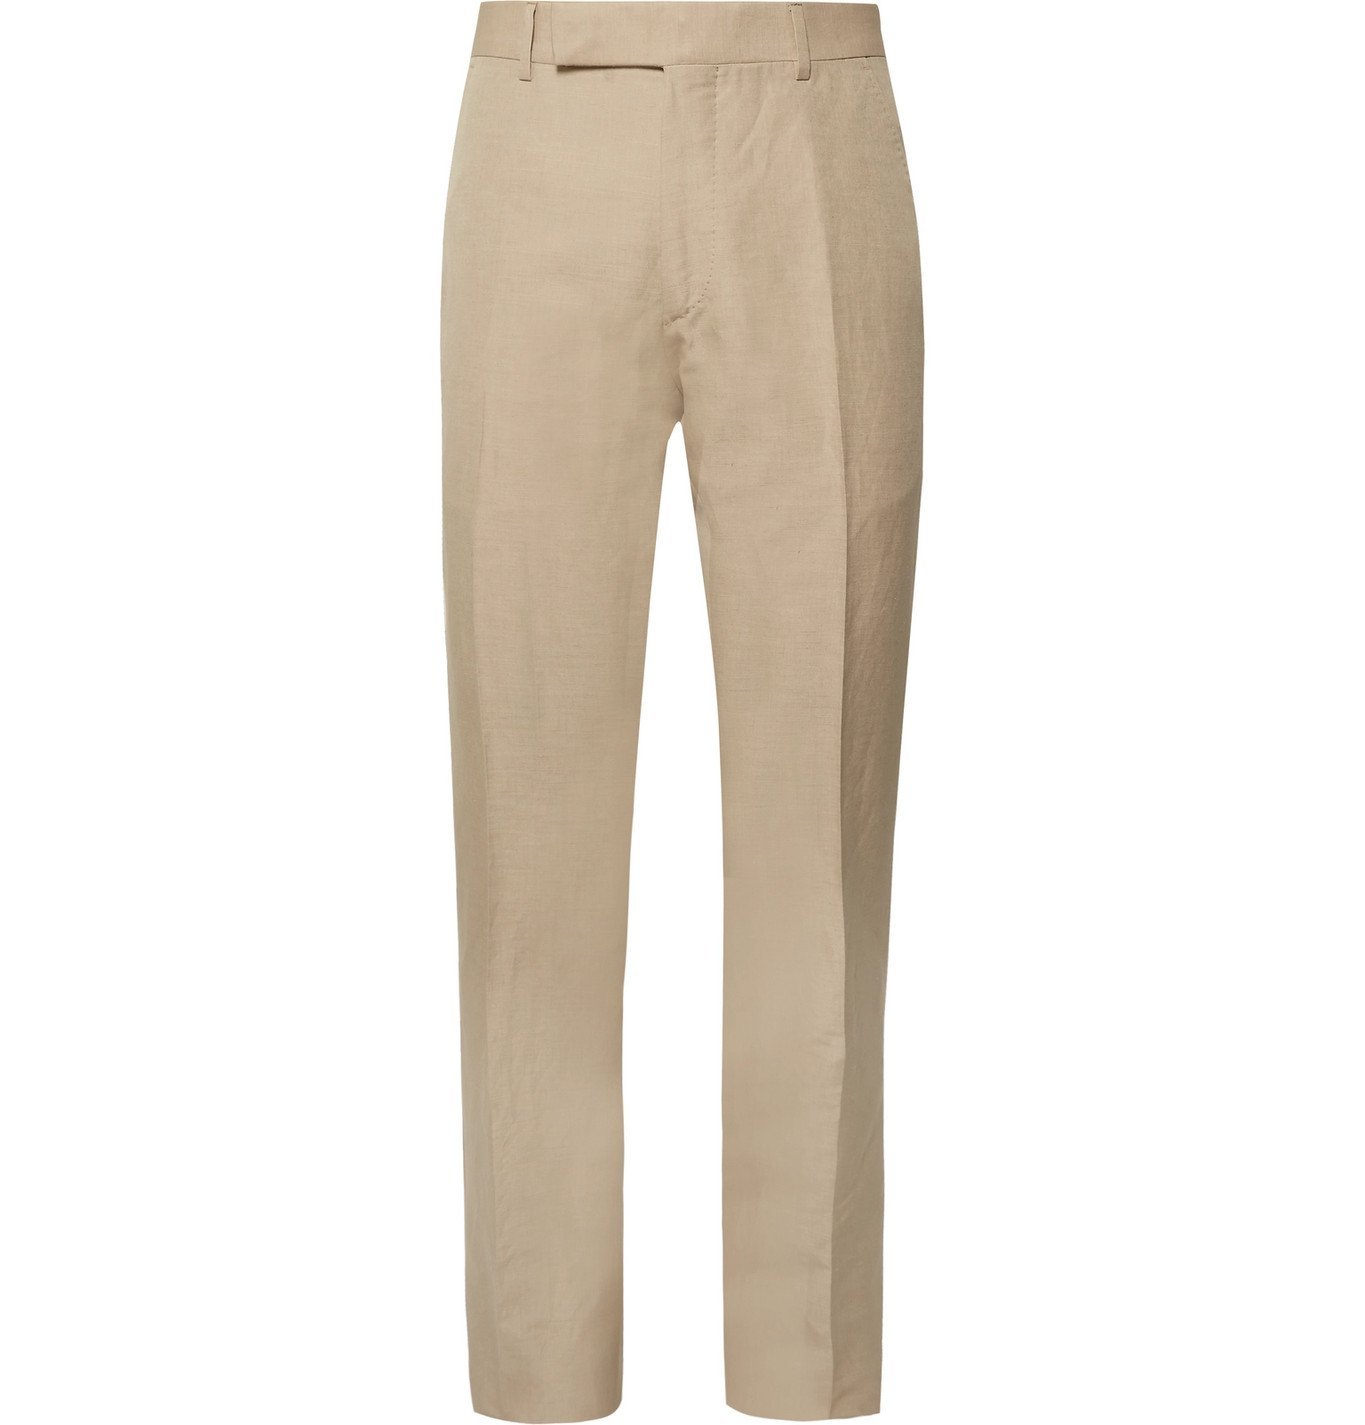 TOM FORD - Sand O'Connor Slim-Fit Linen and Silk-Blend Suit Trousers -  Neutrals TOM FORD